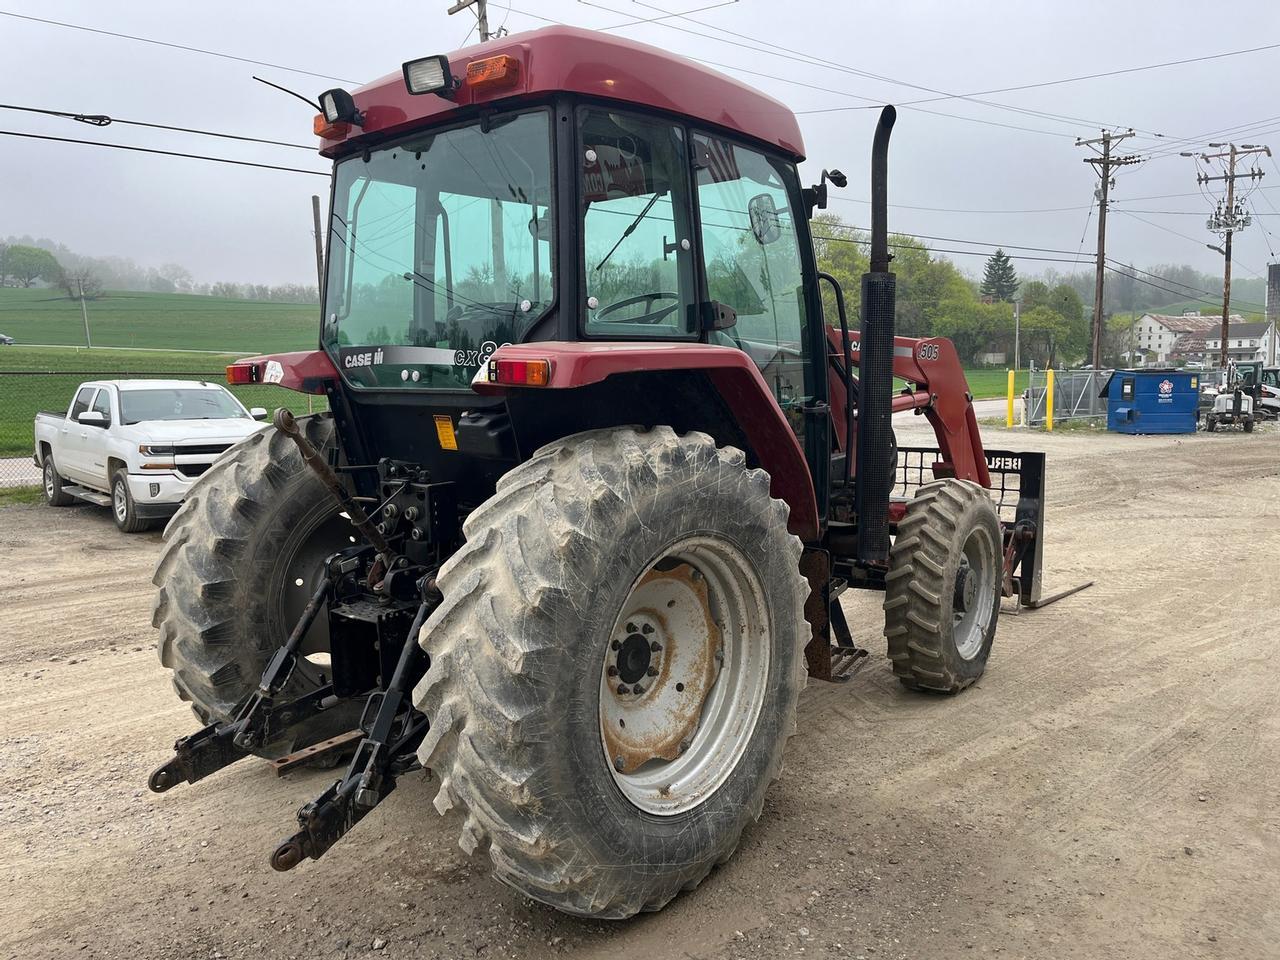 Case IH CX80 Tractor with Loader